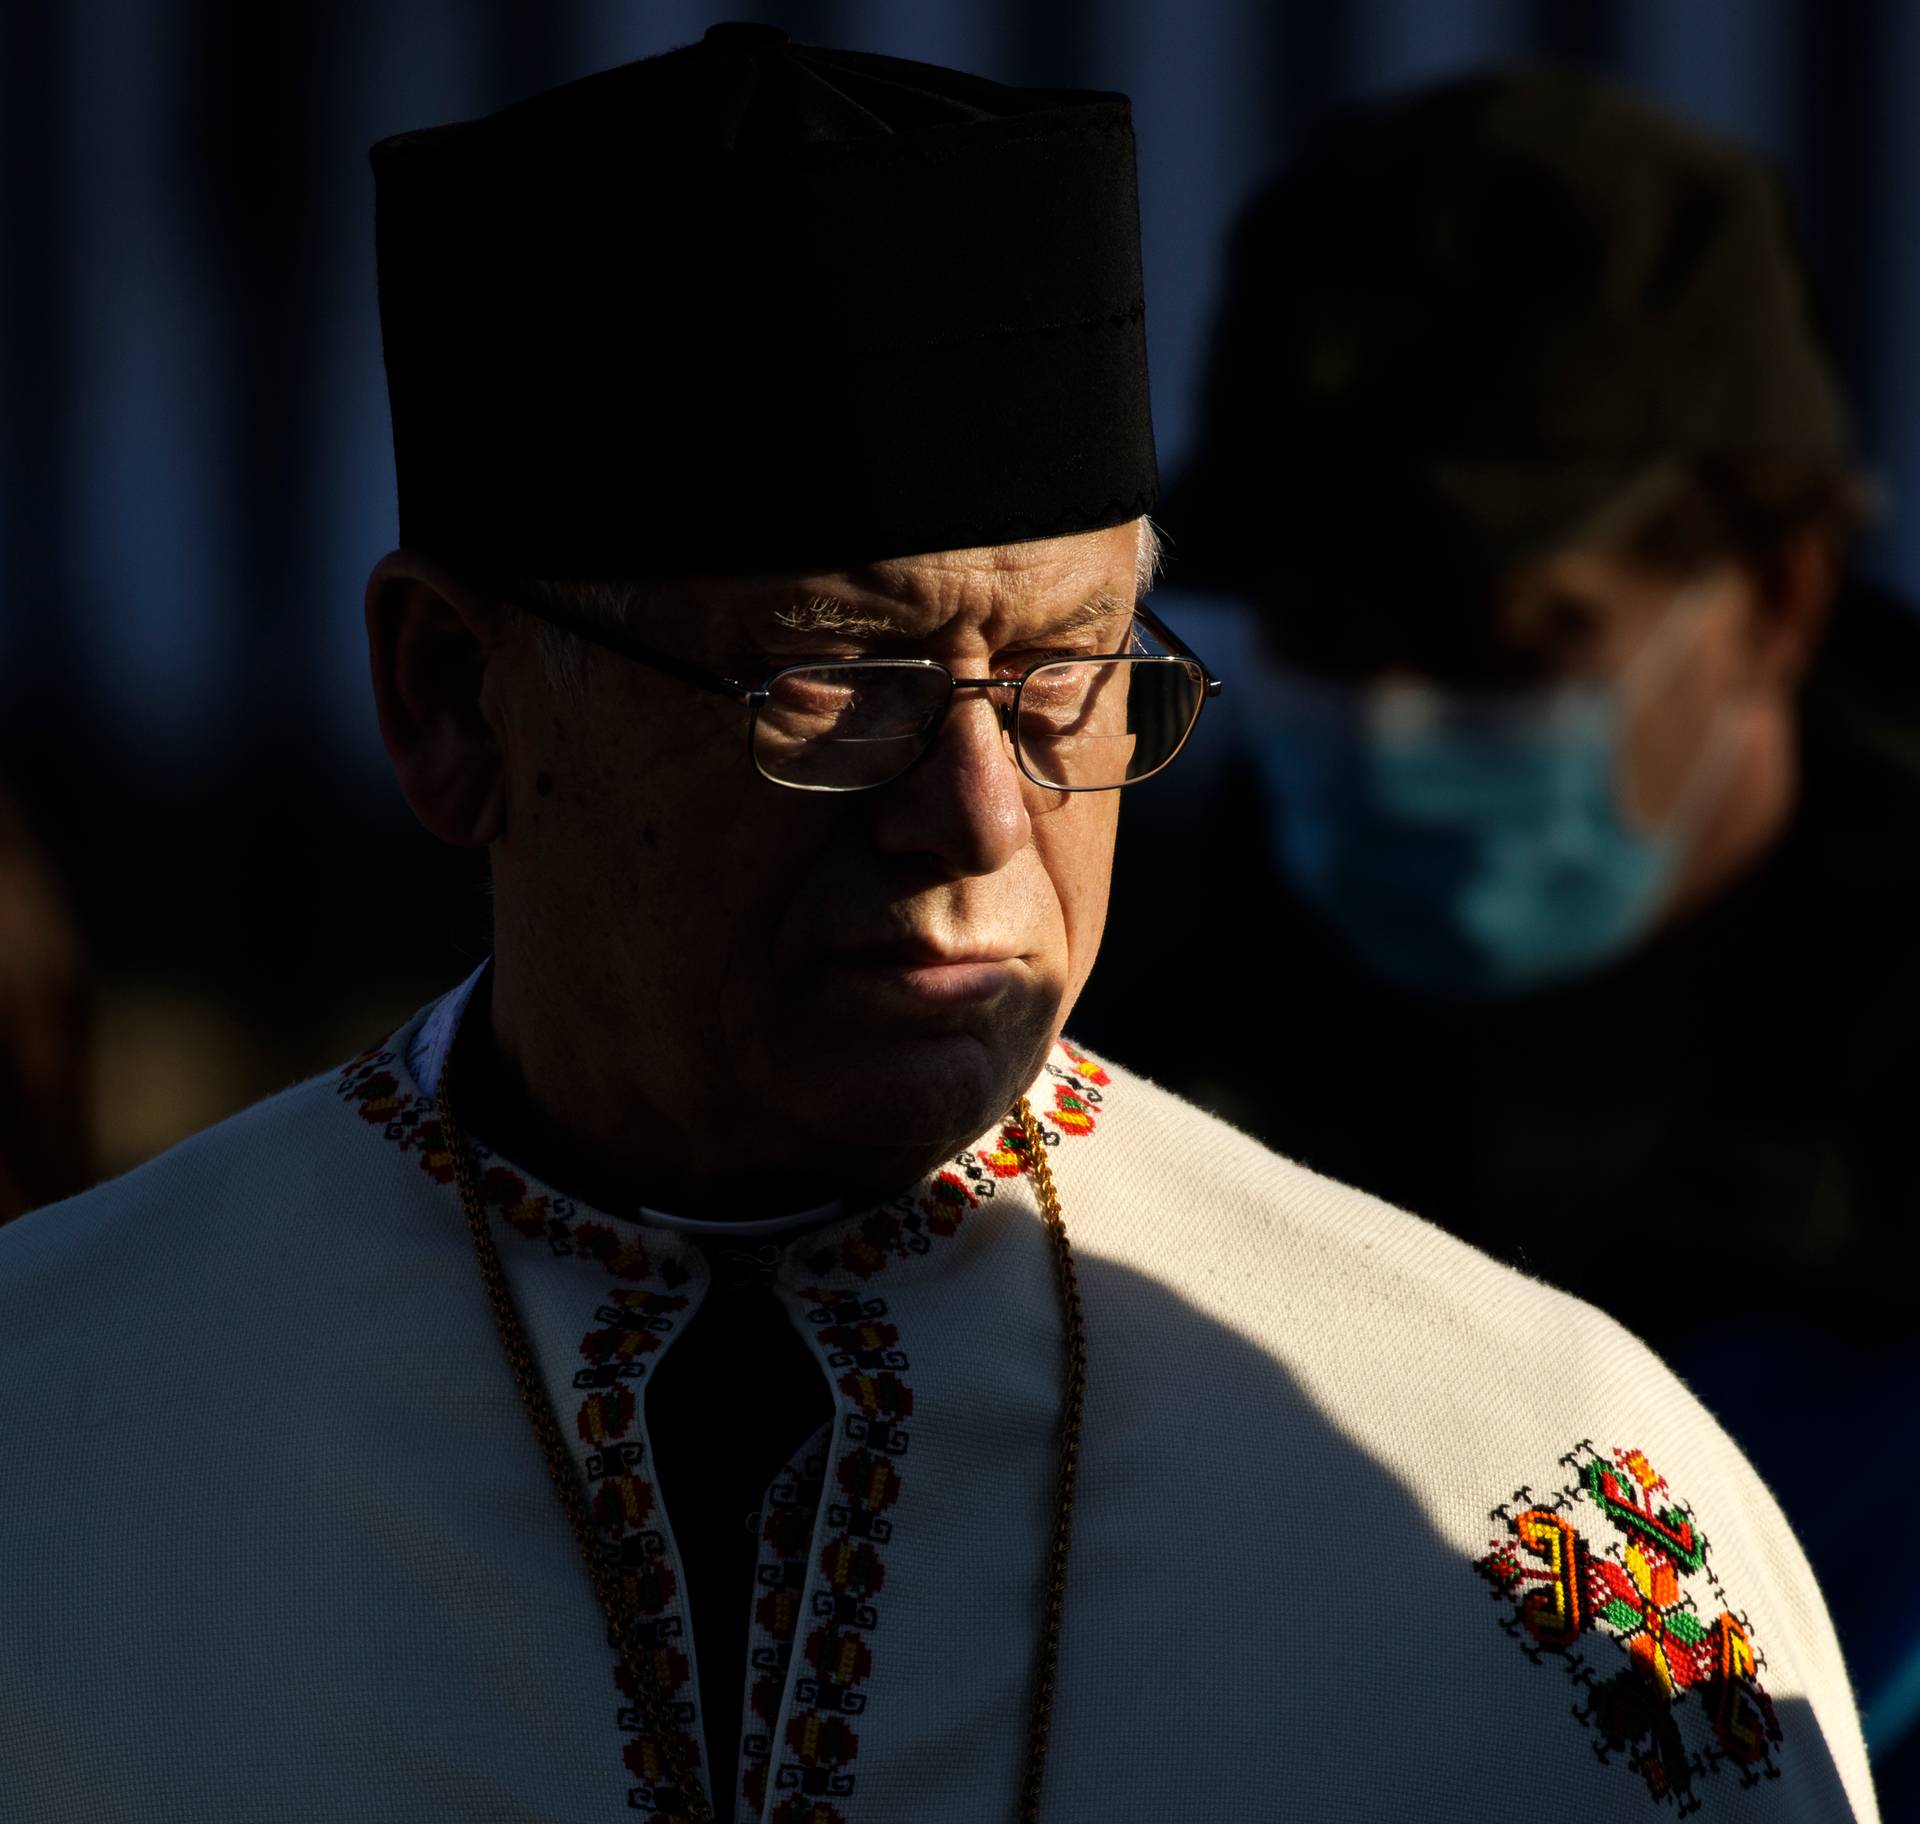 A clergyman in the Orthodox Church of Ukraine stands with pro-Ukrainian activists during a prayer and demonstration against Russian aggression in front of the White House, on Feb. 6, 2022